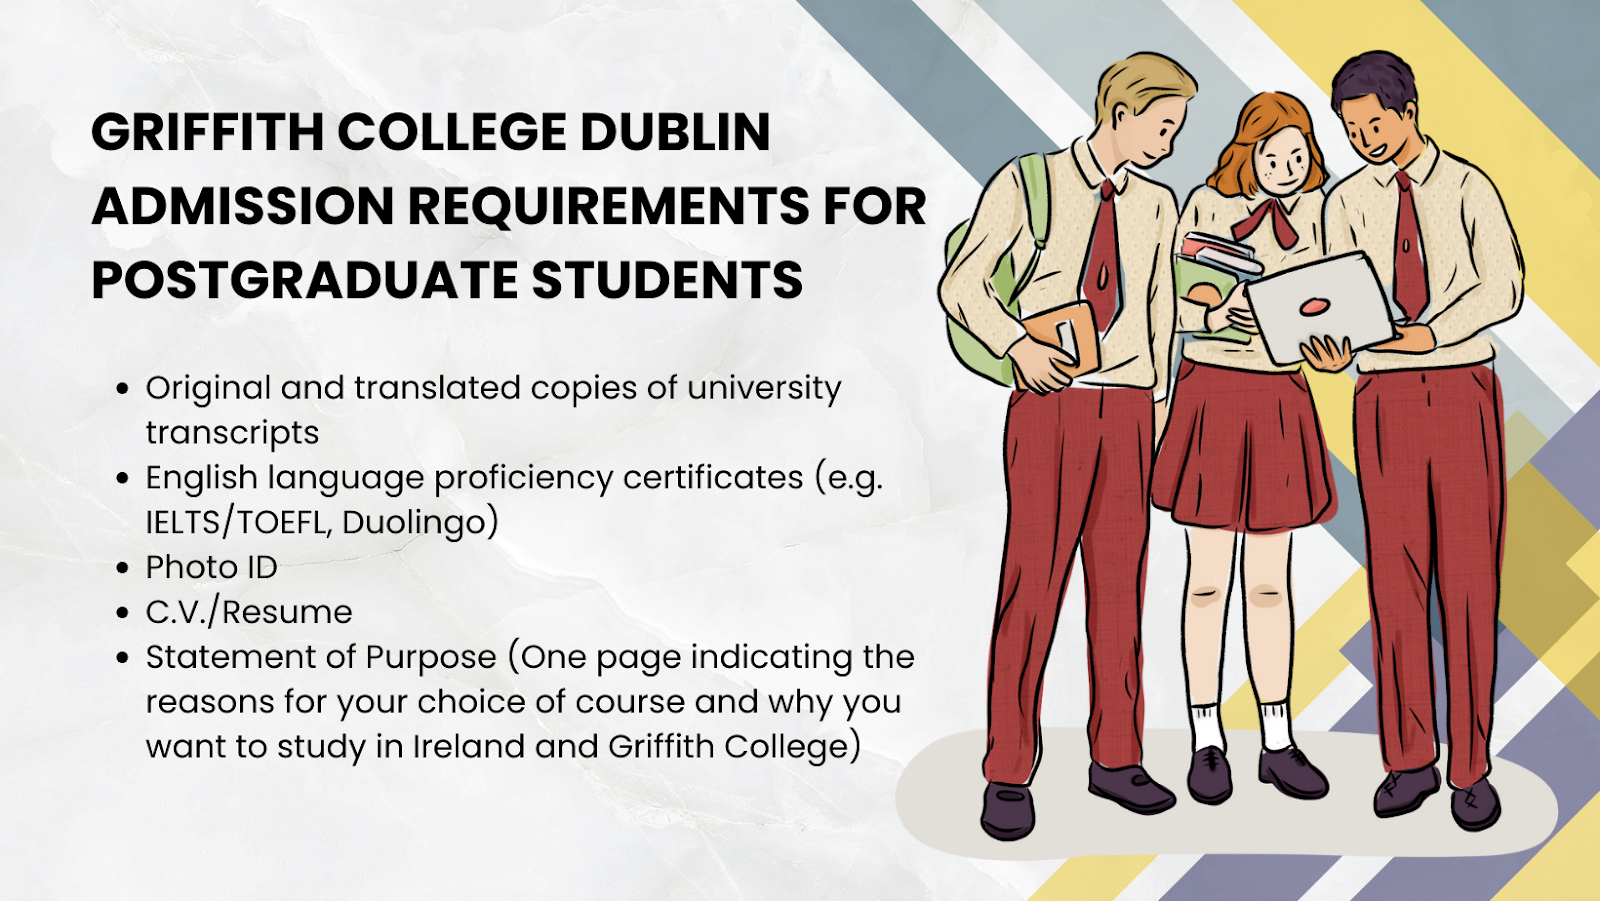 Griffith College Dublin Admission Requirements for PG students